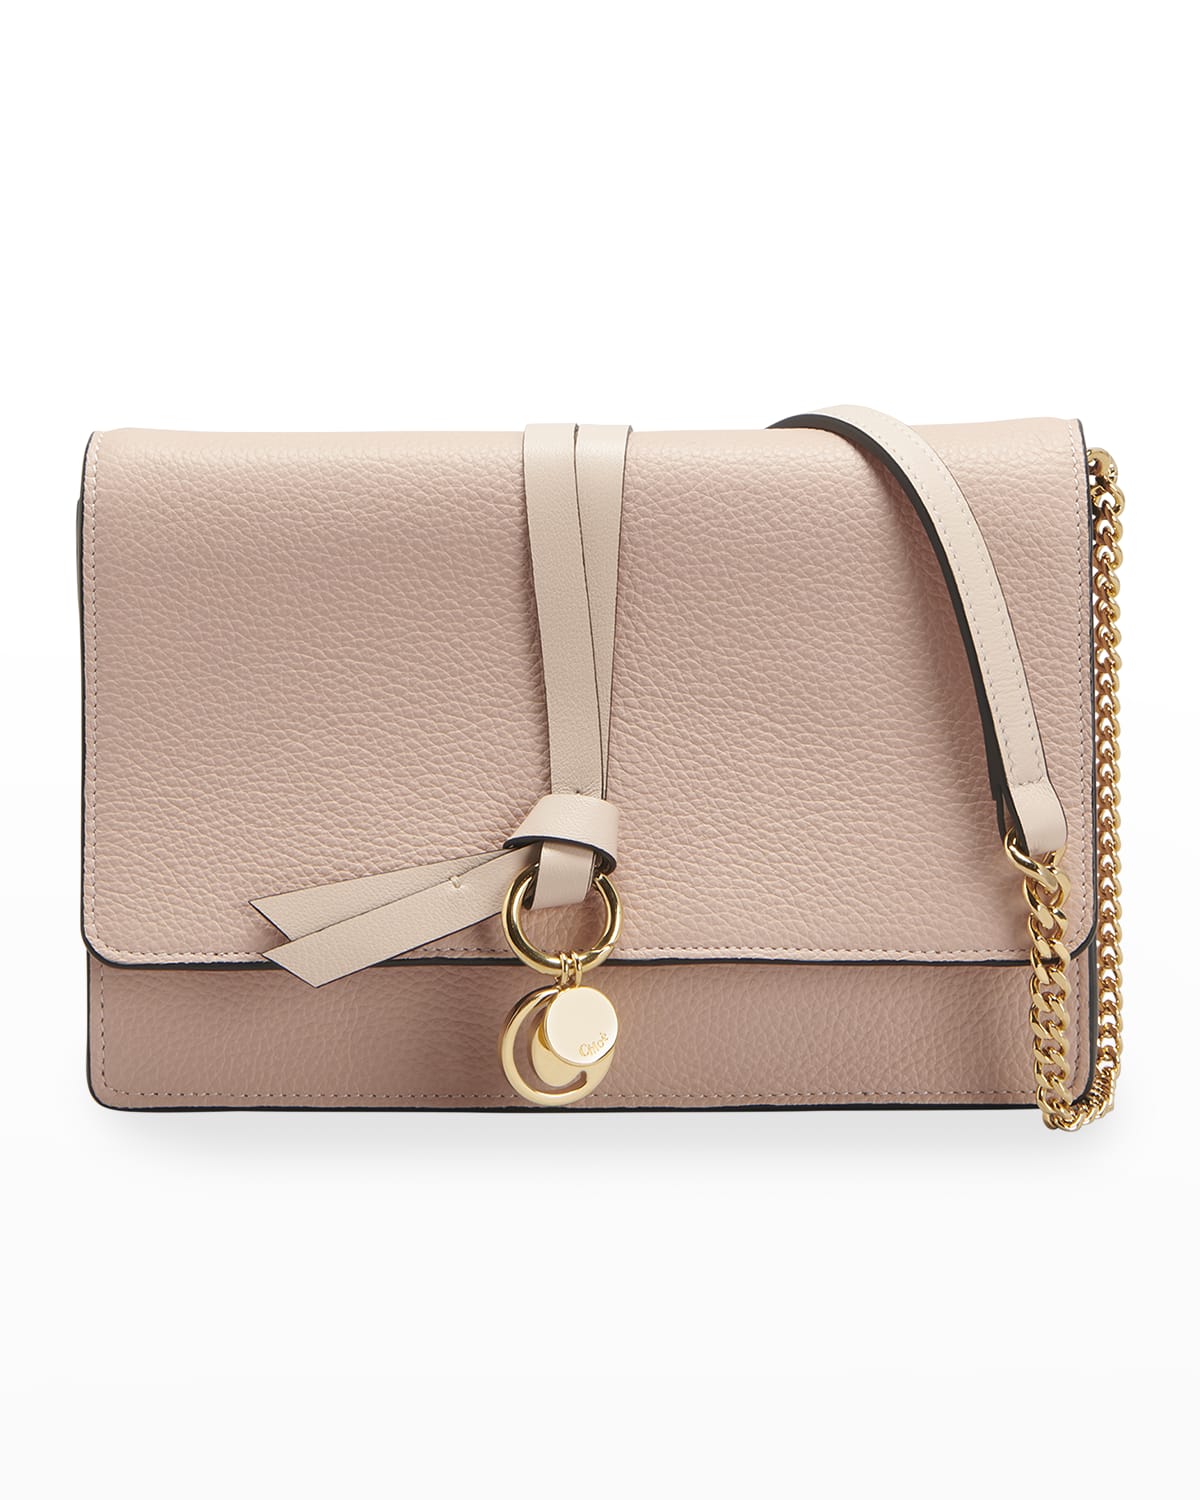 Chloe Aby Chain Leather Shoulder Bag | Neiman Marcus